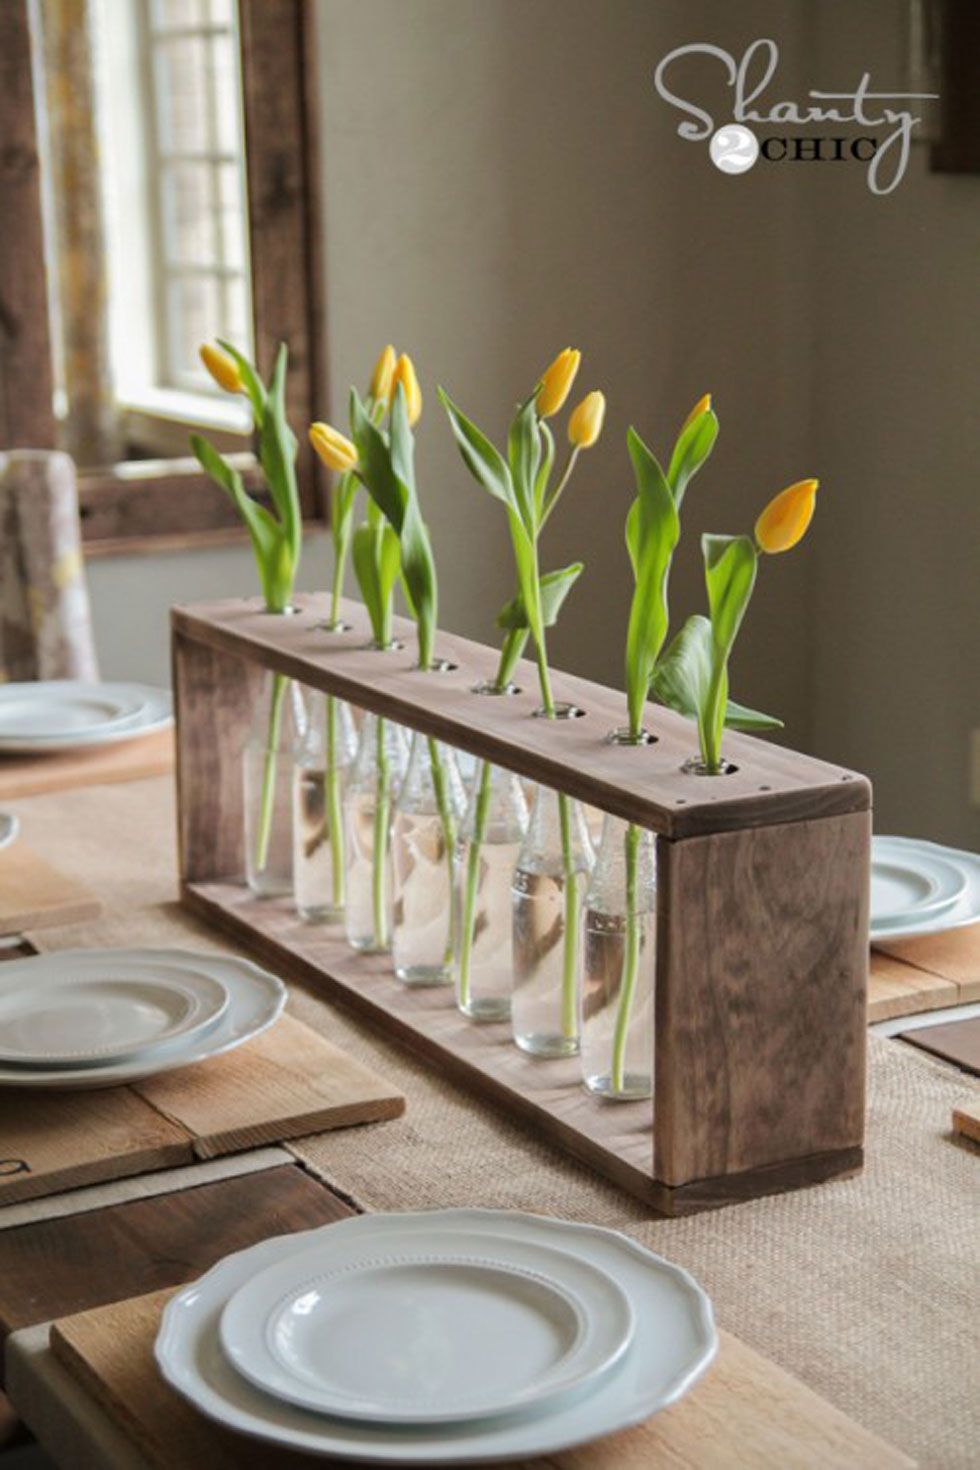 mother's day wood projects